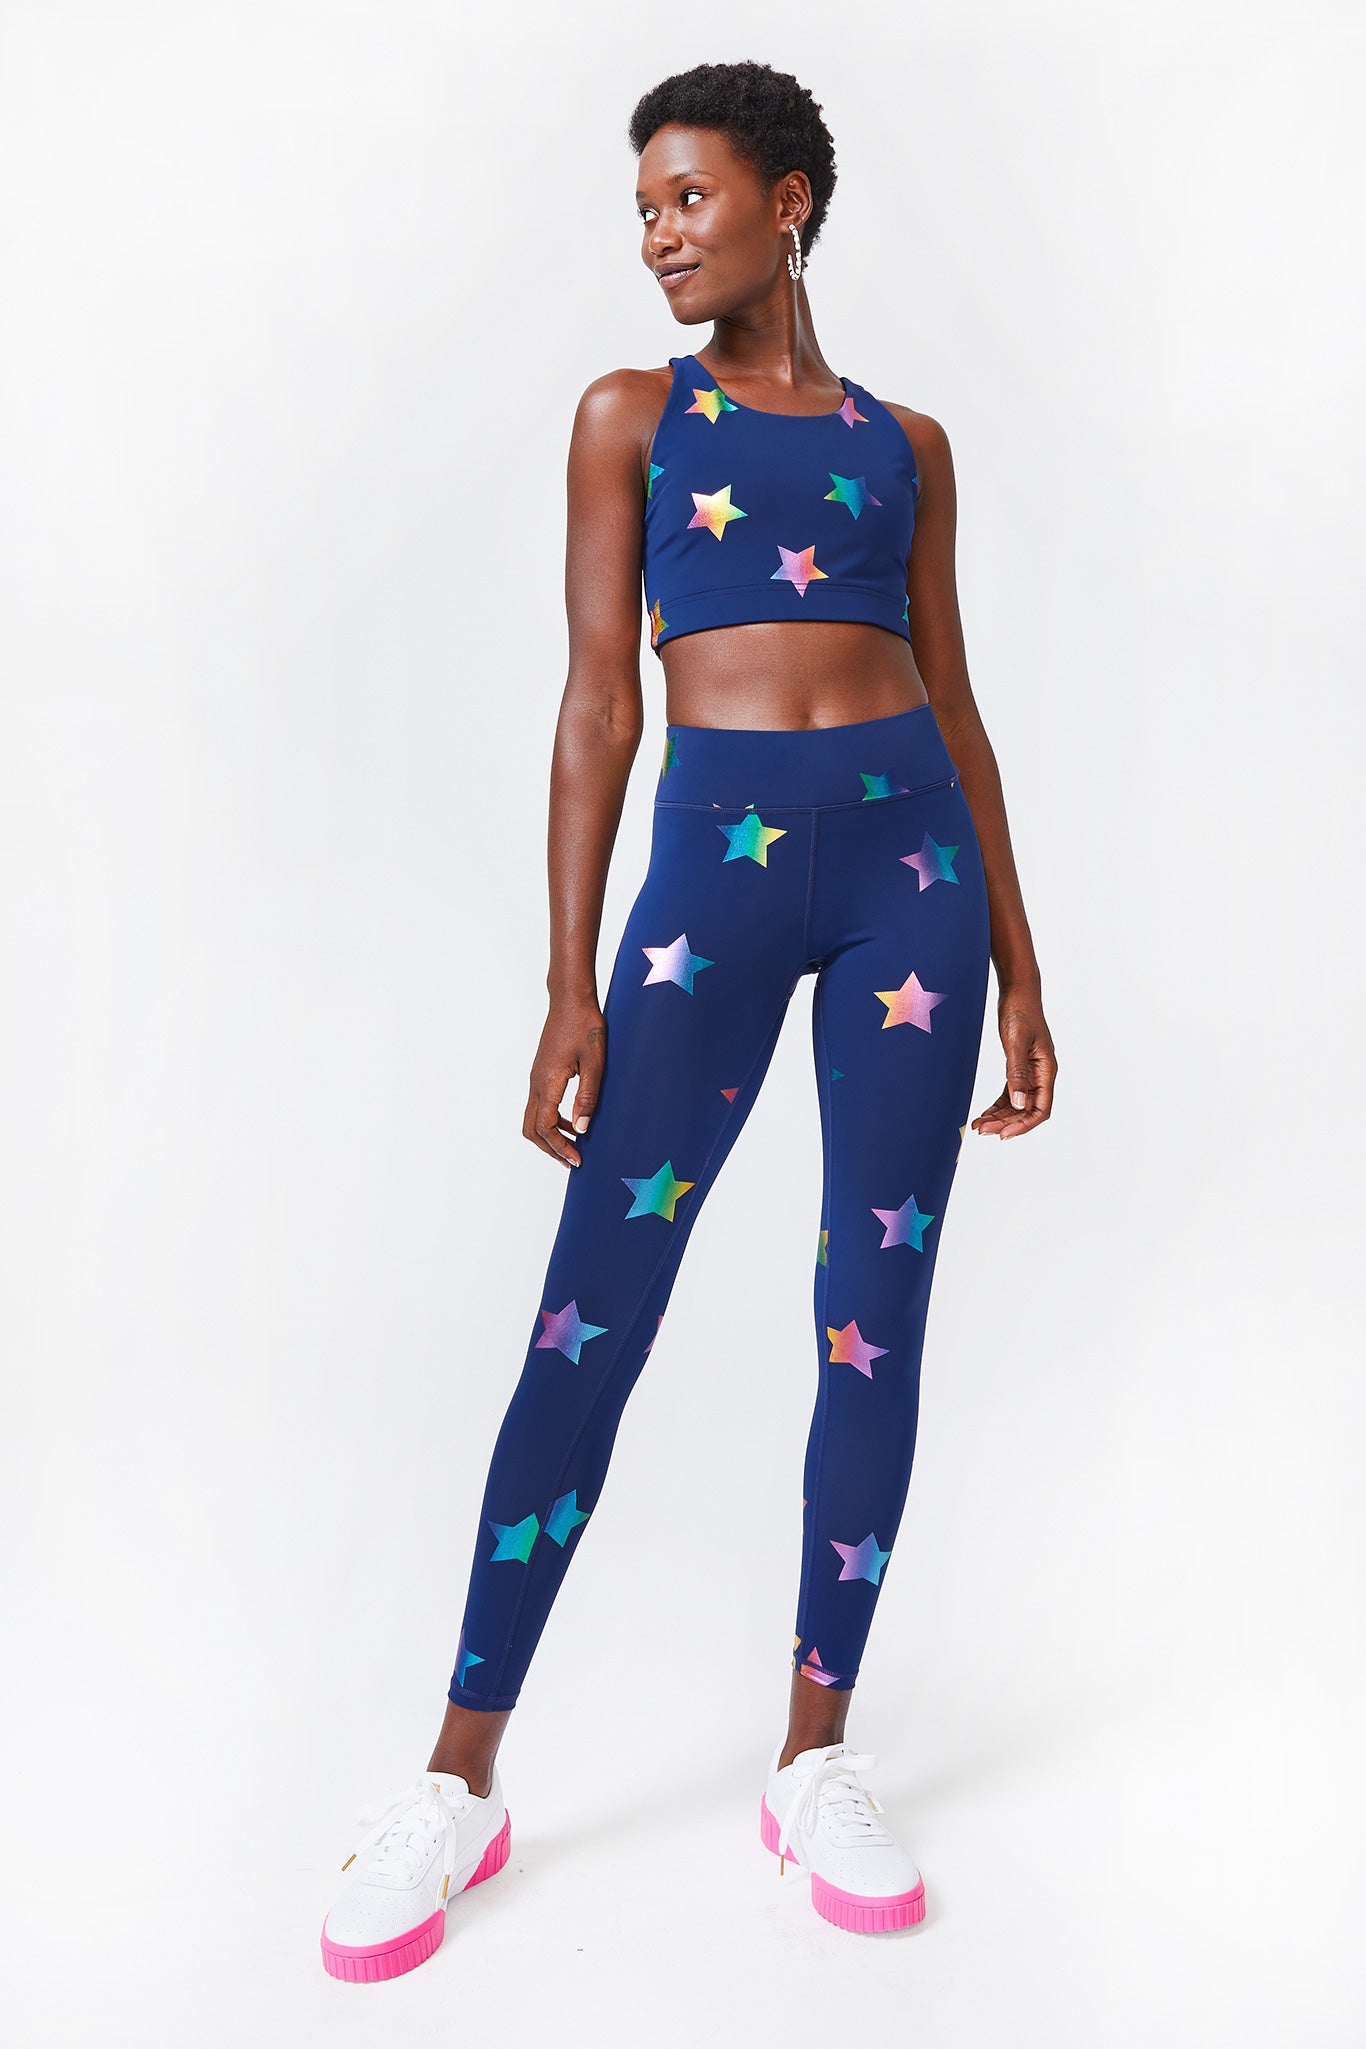 UpLift Leggings in Navy Rainbow Star Foil with Tall Band